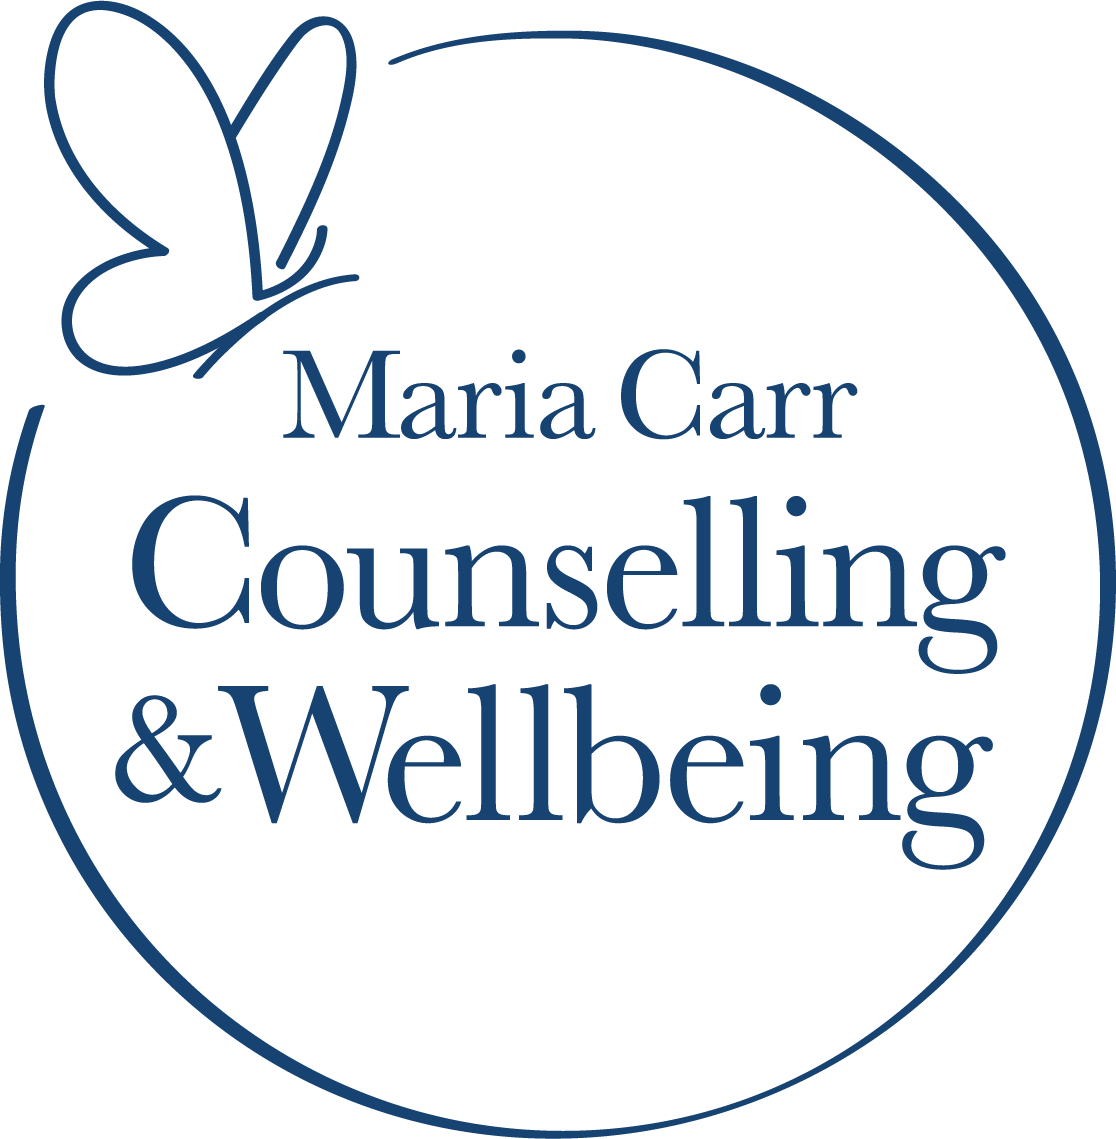 Maria Carr Counselling & Wellbeing